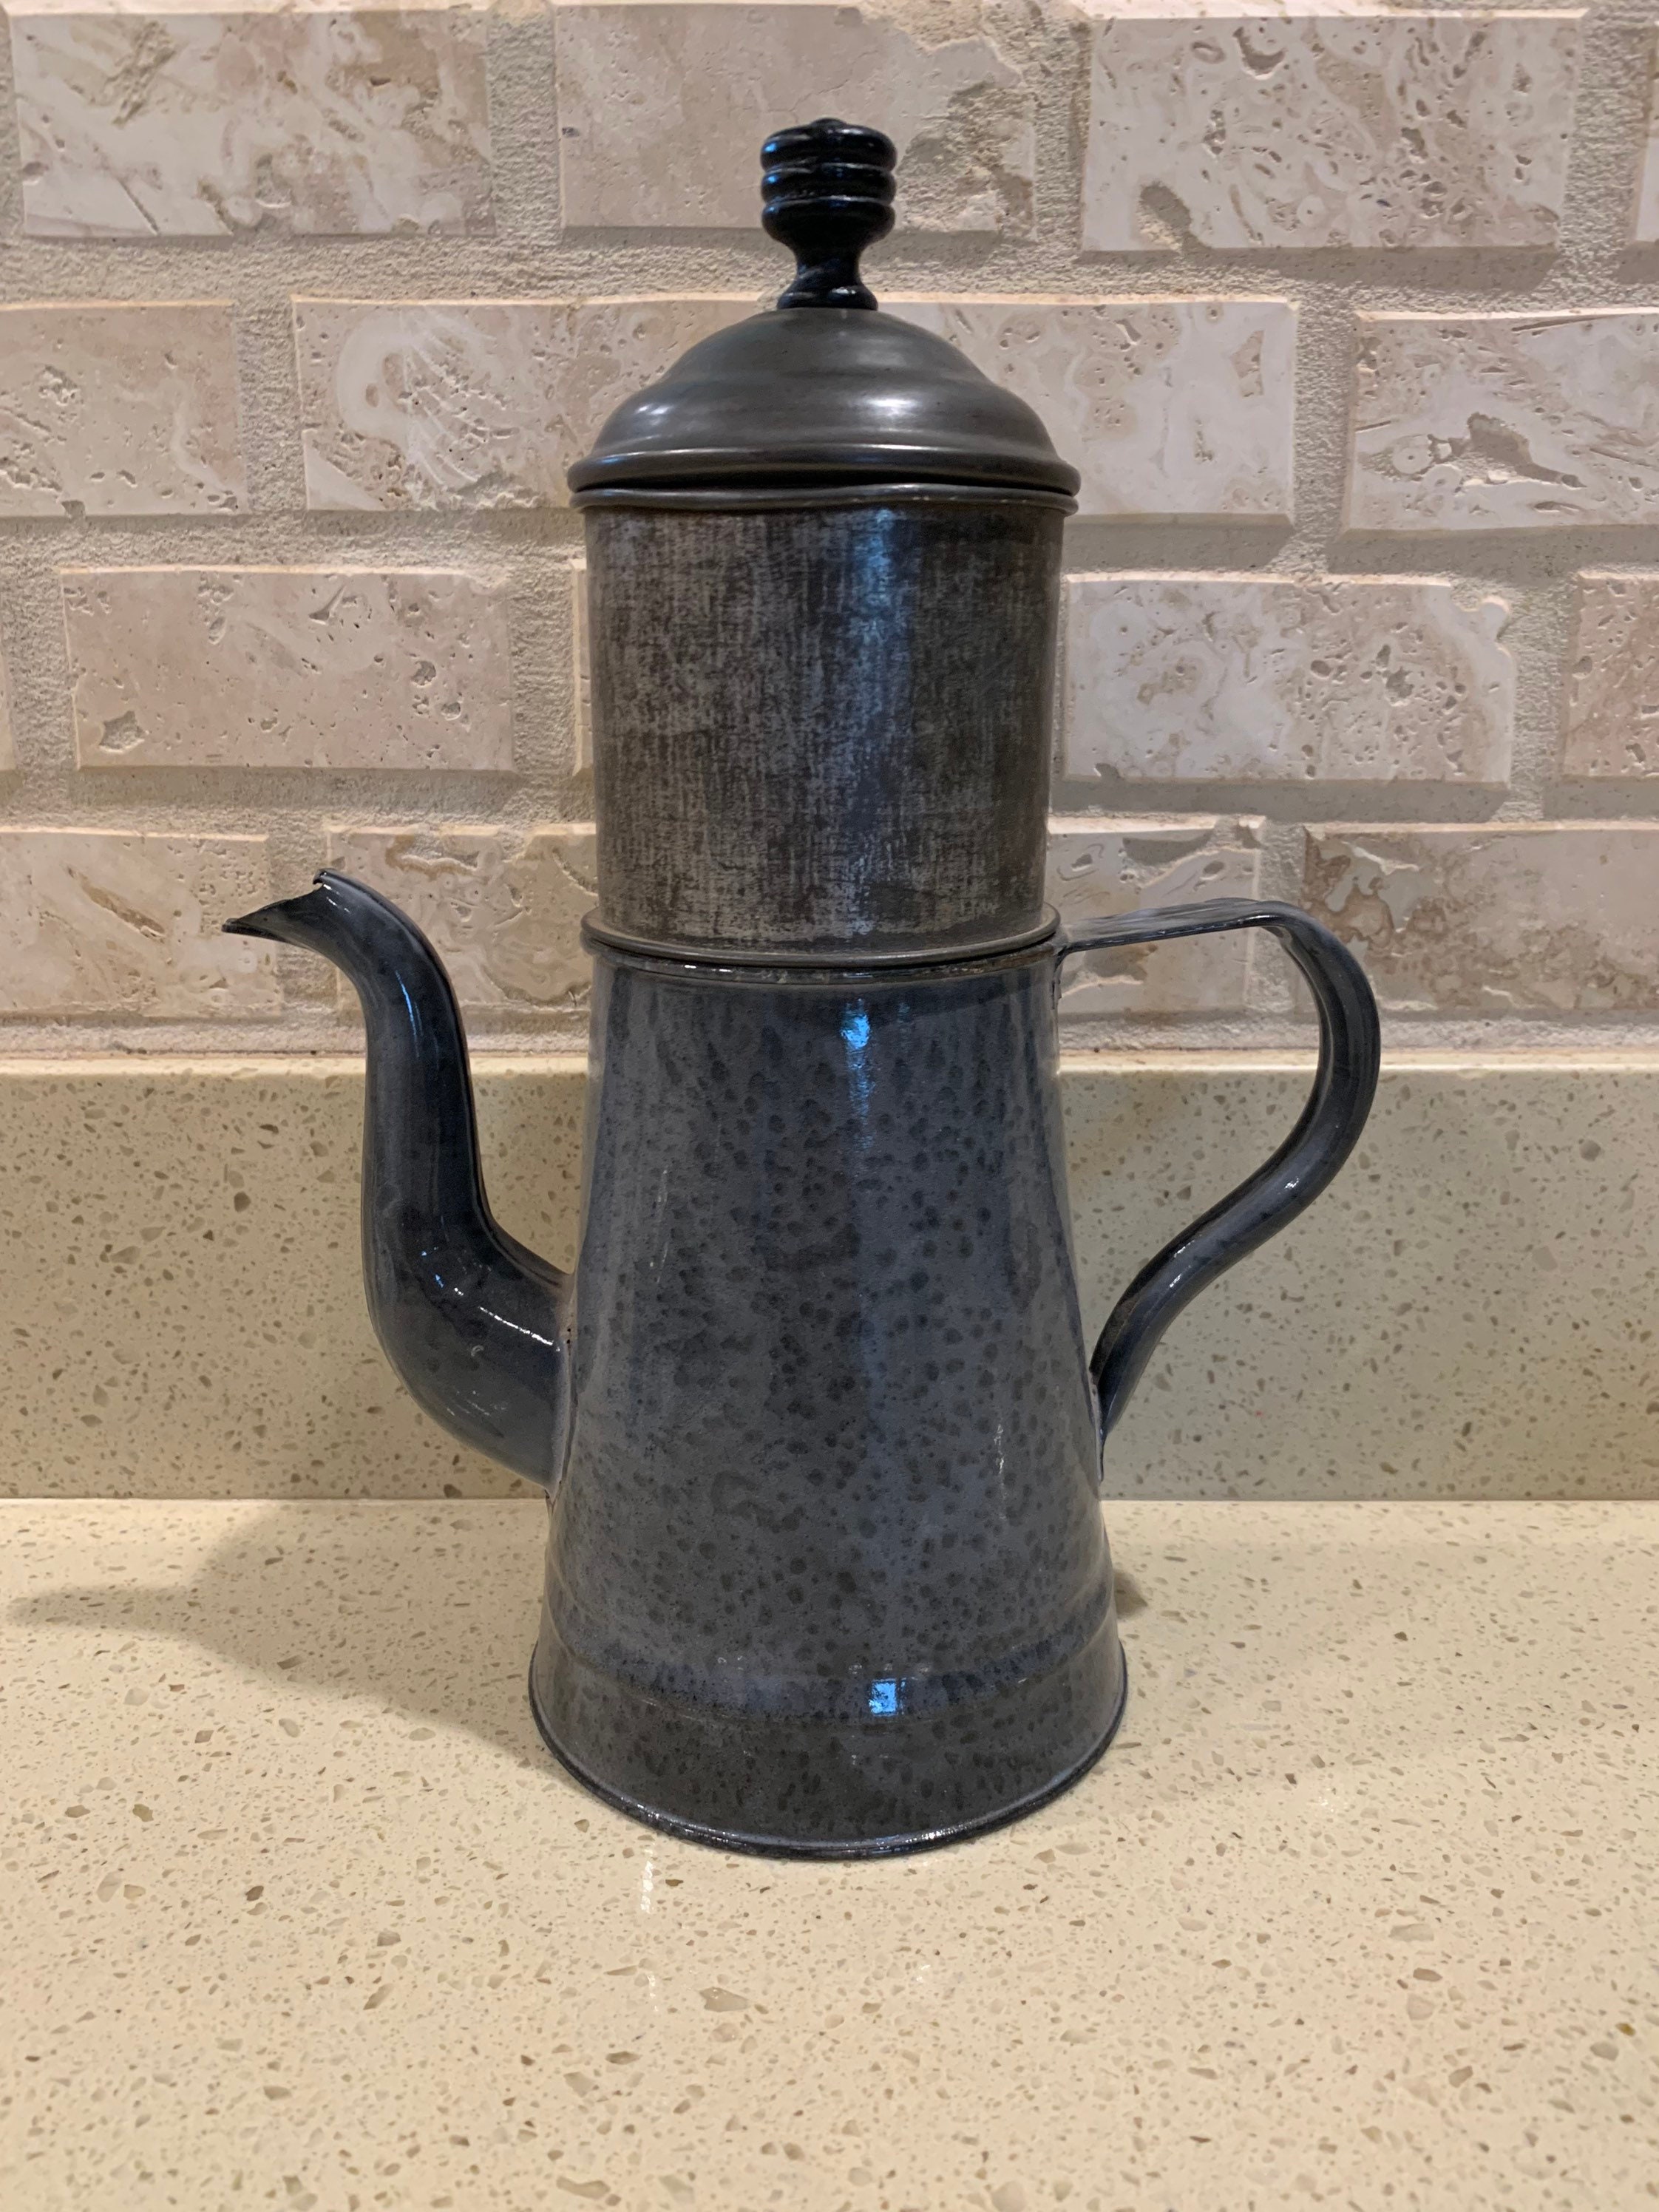 Antique Large Gray Granite Ware Cowboy Coffee Pot 2 1/2 Gallon Bail & Side  Handle 13 in